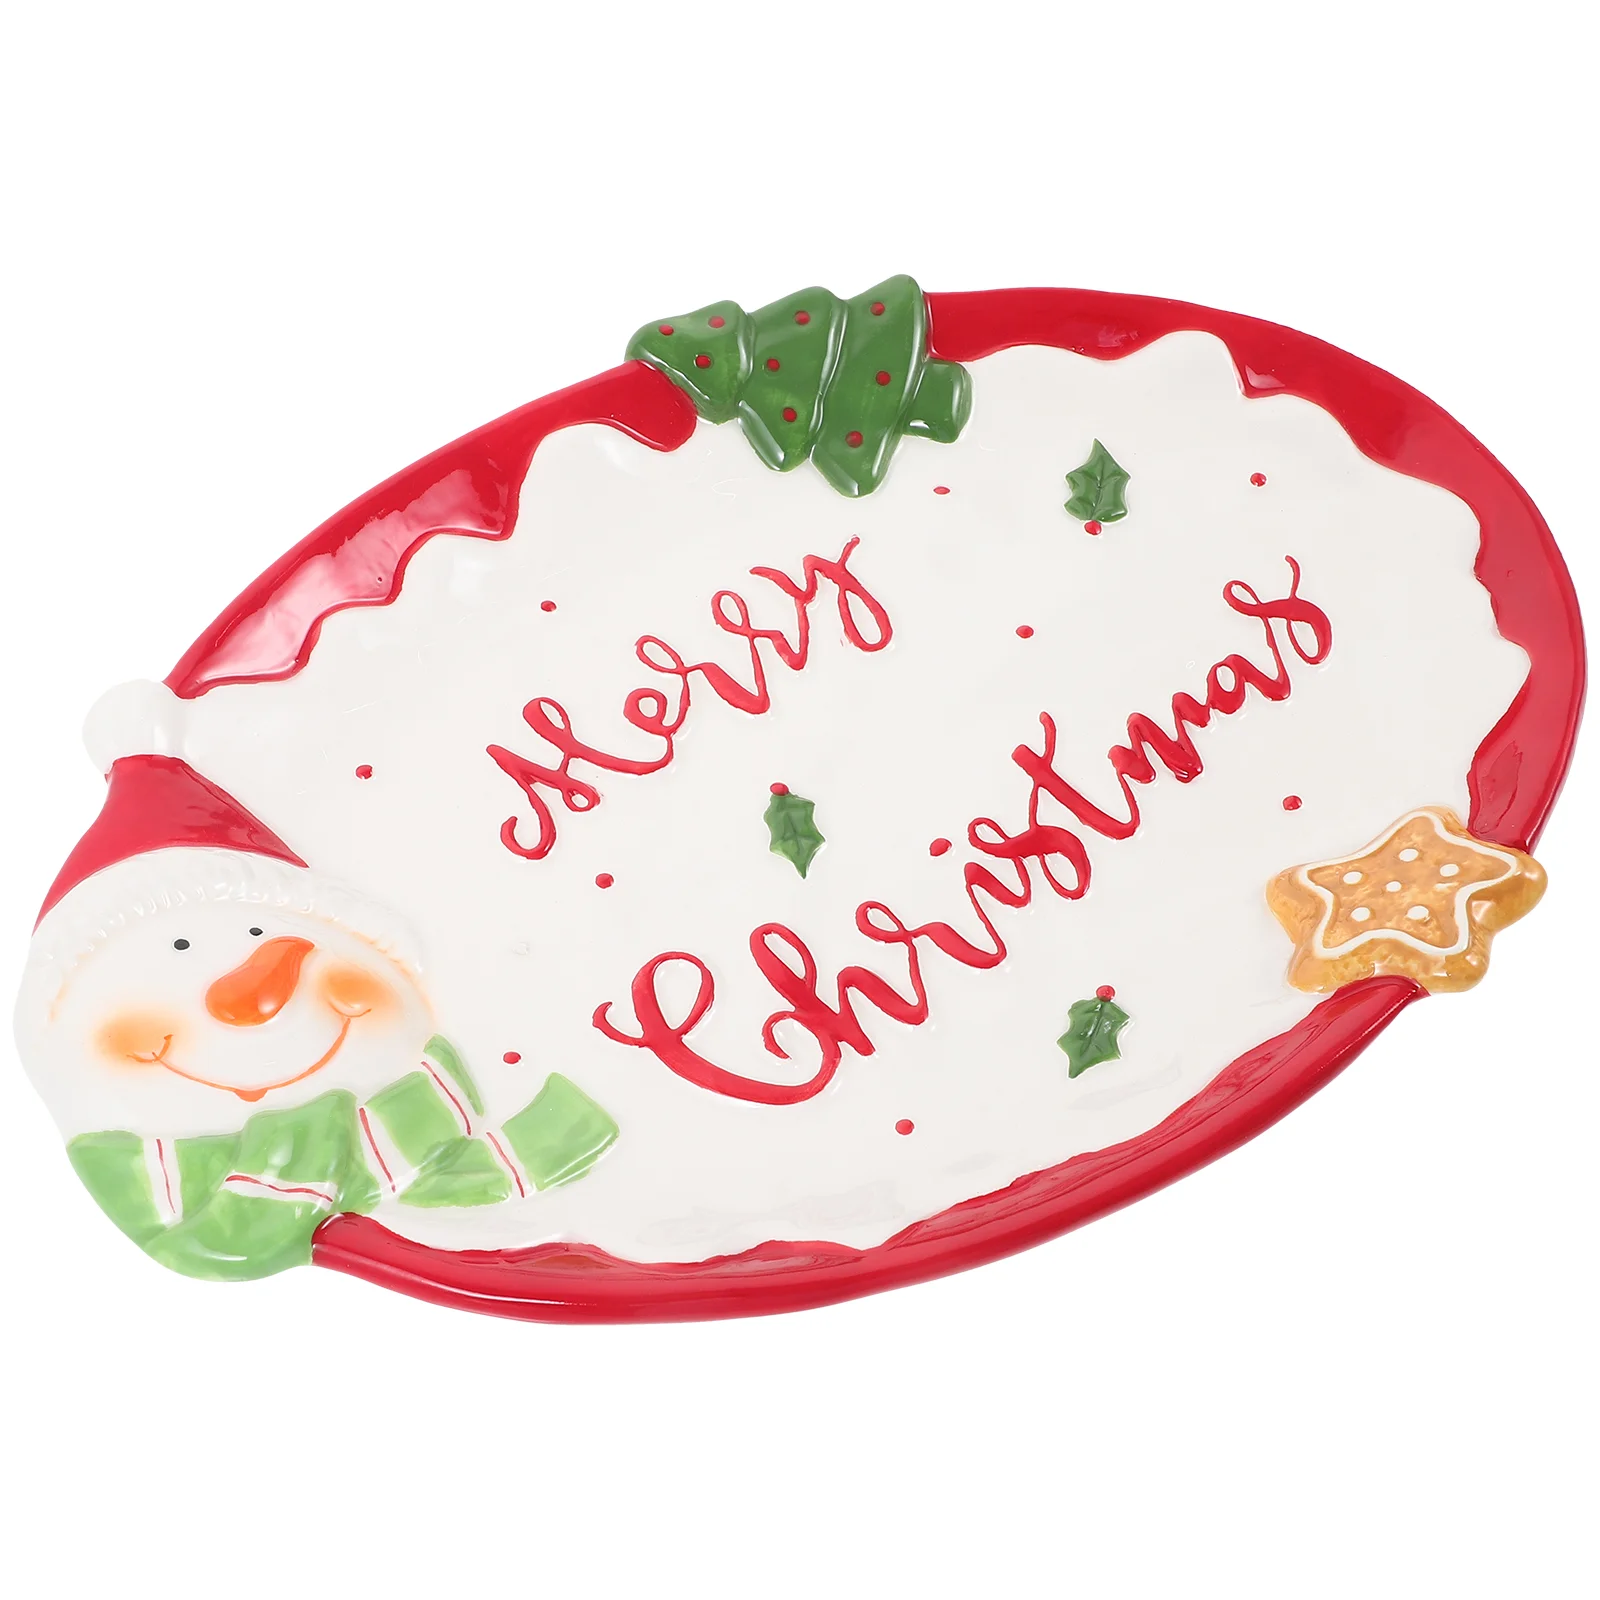 

Christmas Ceramic Plate Decoration Dishes Sauce Chips Serving Dip Bowl Trays Plates Cutlery